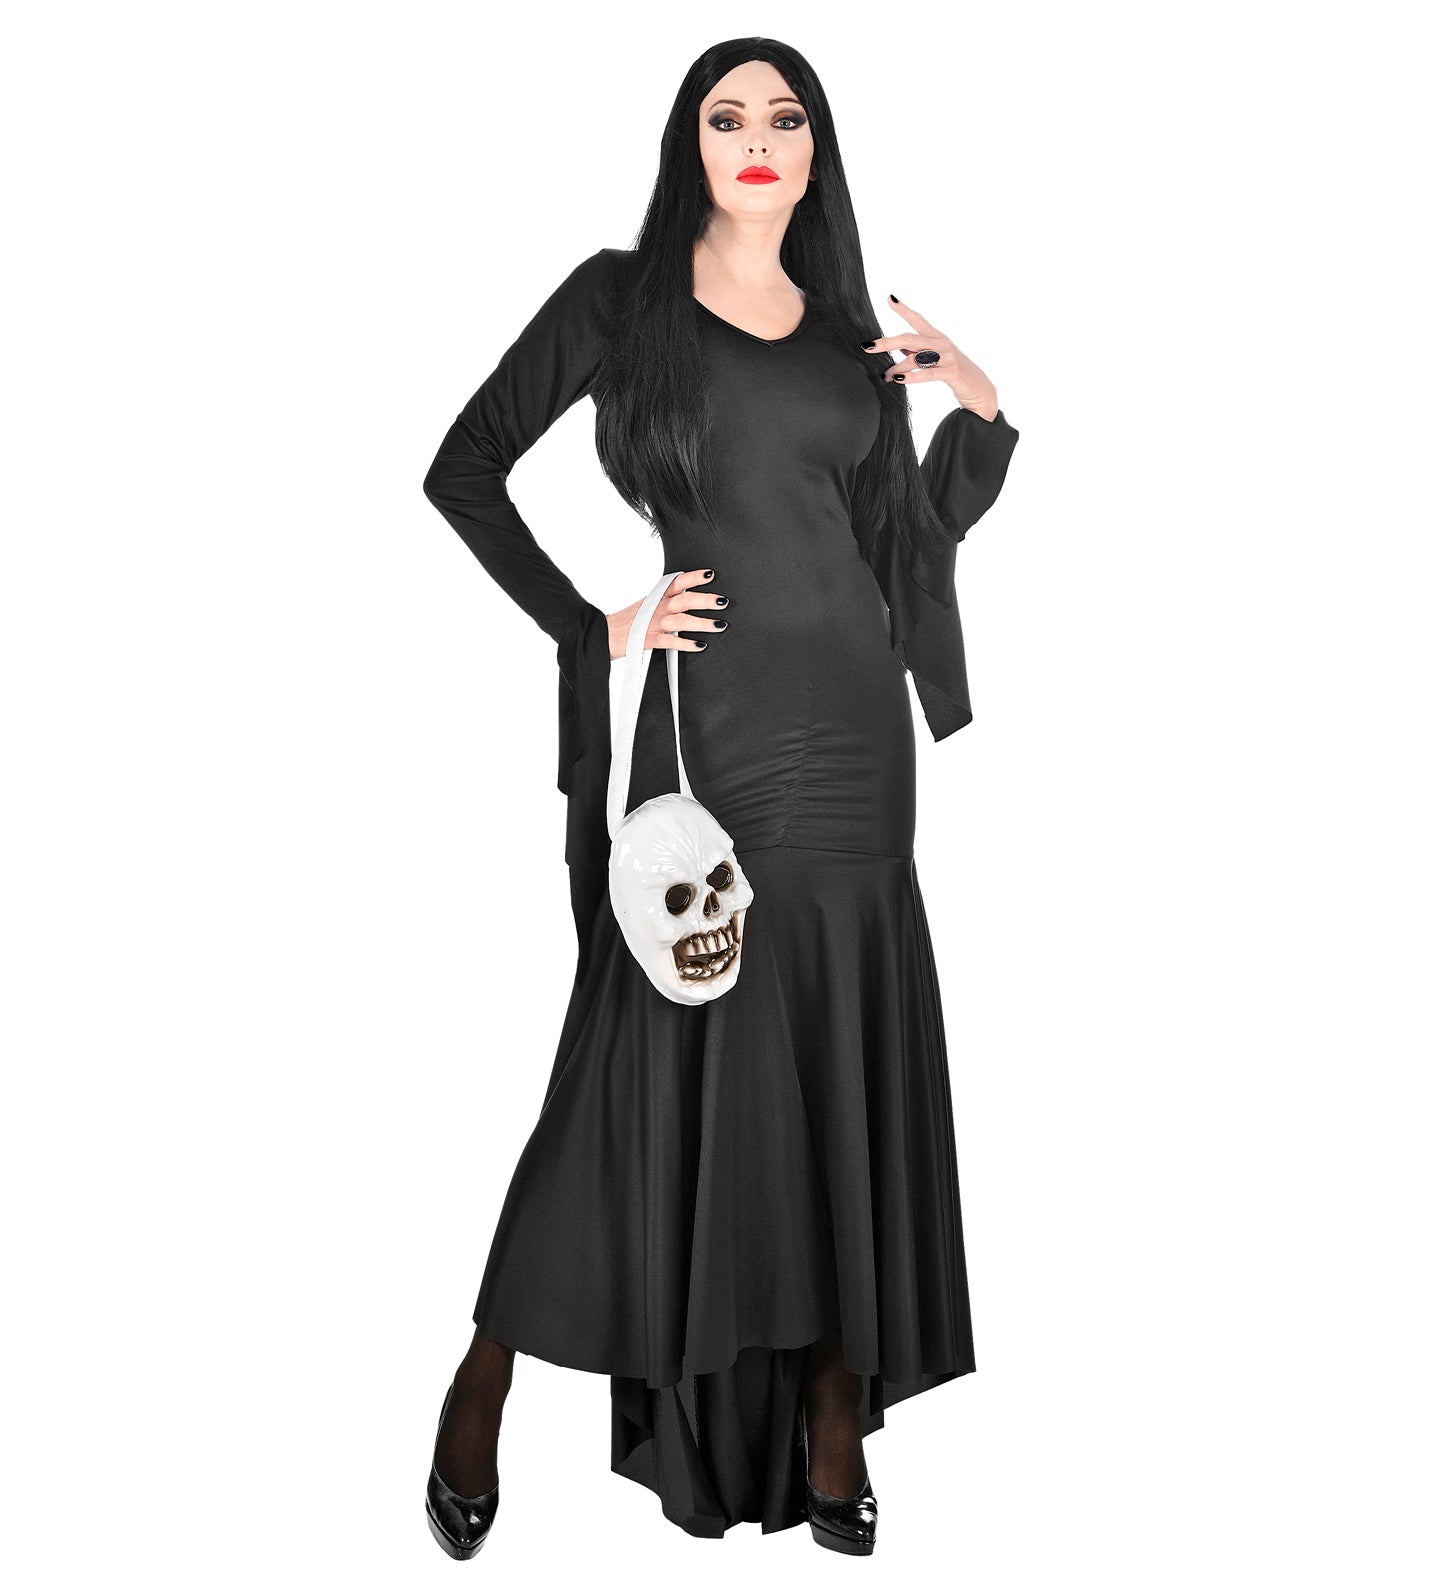 Morticia Addams dress outfit Adult